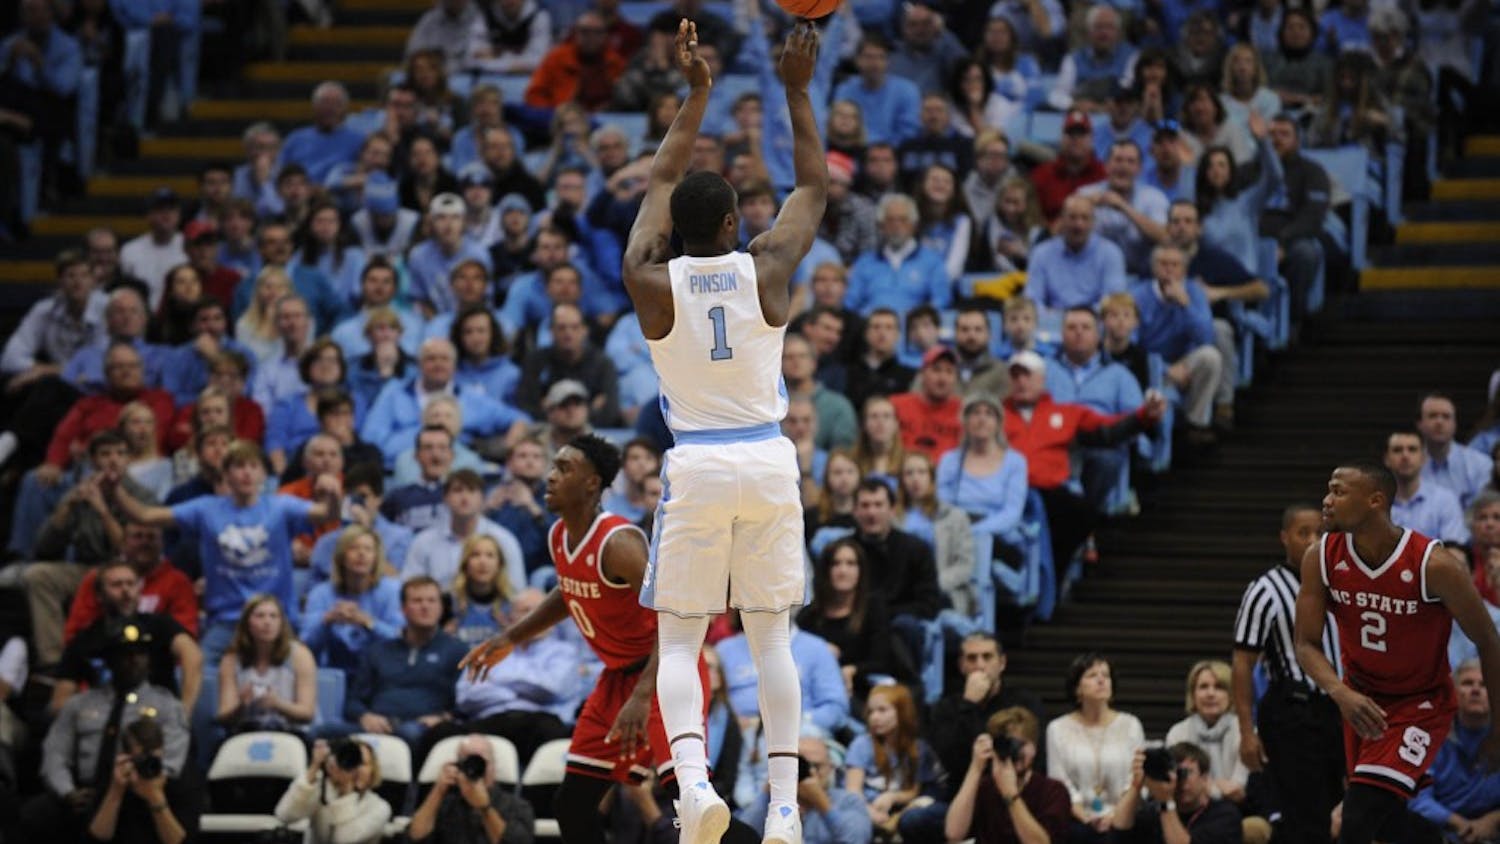 Junior&nbsp;Theo Pinson (1) pulls up for a three point shot.&nbsp;Pinson played his first game of the season against N.C. State on Sunday after injuring his food.&nbsp;